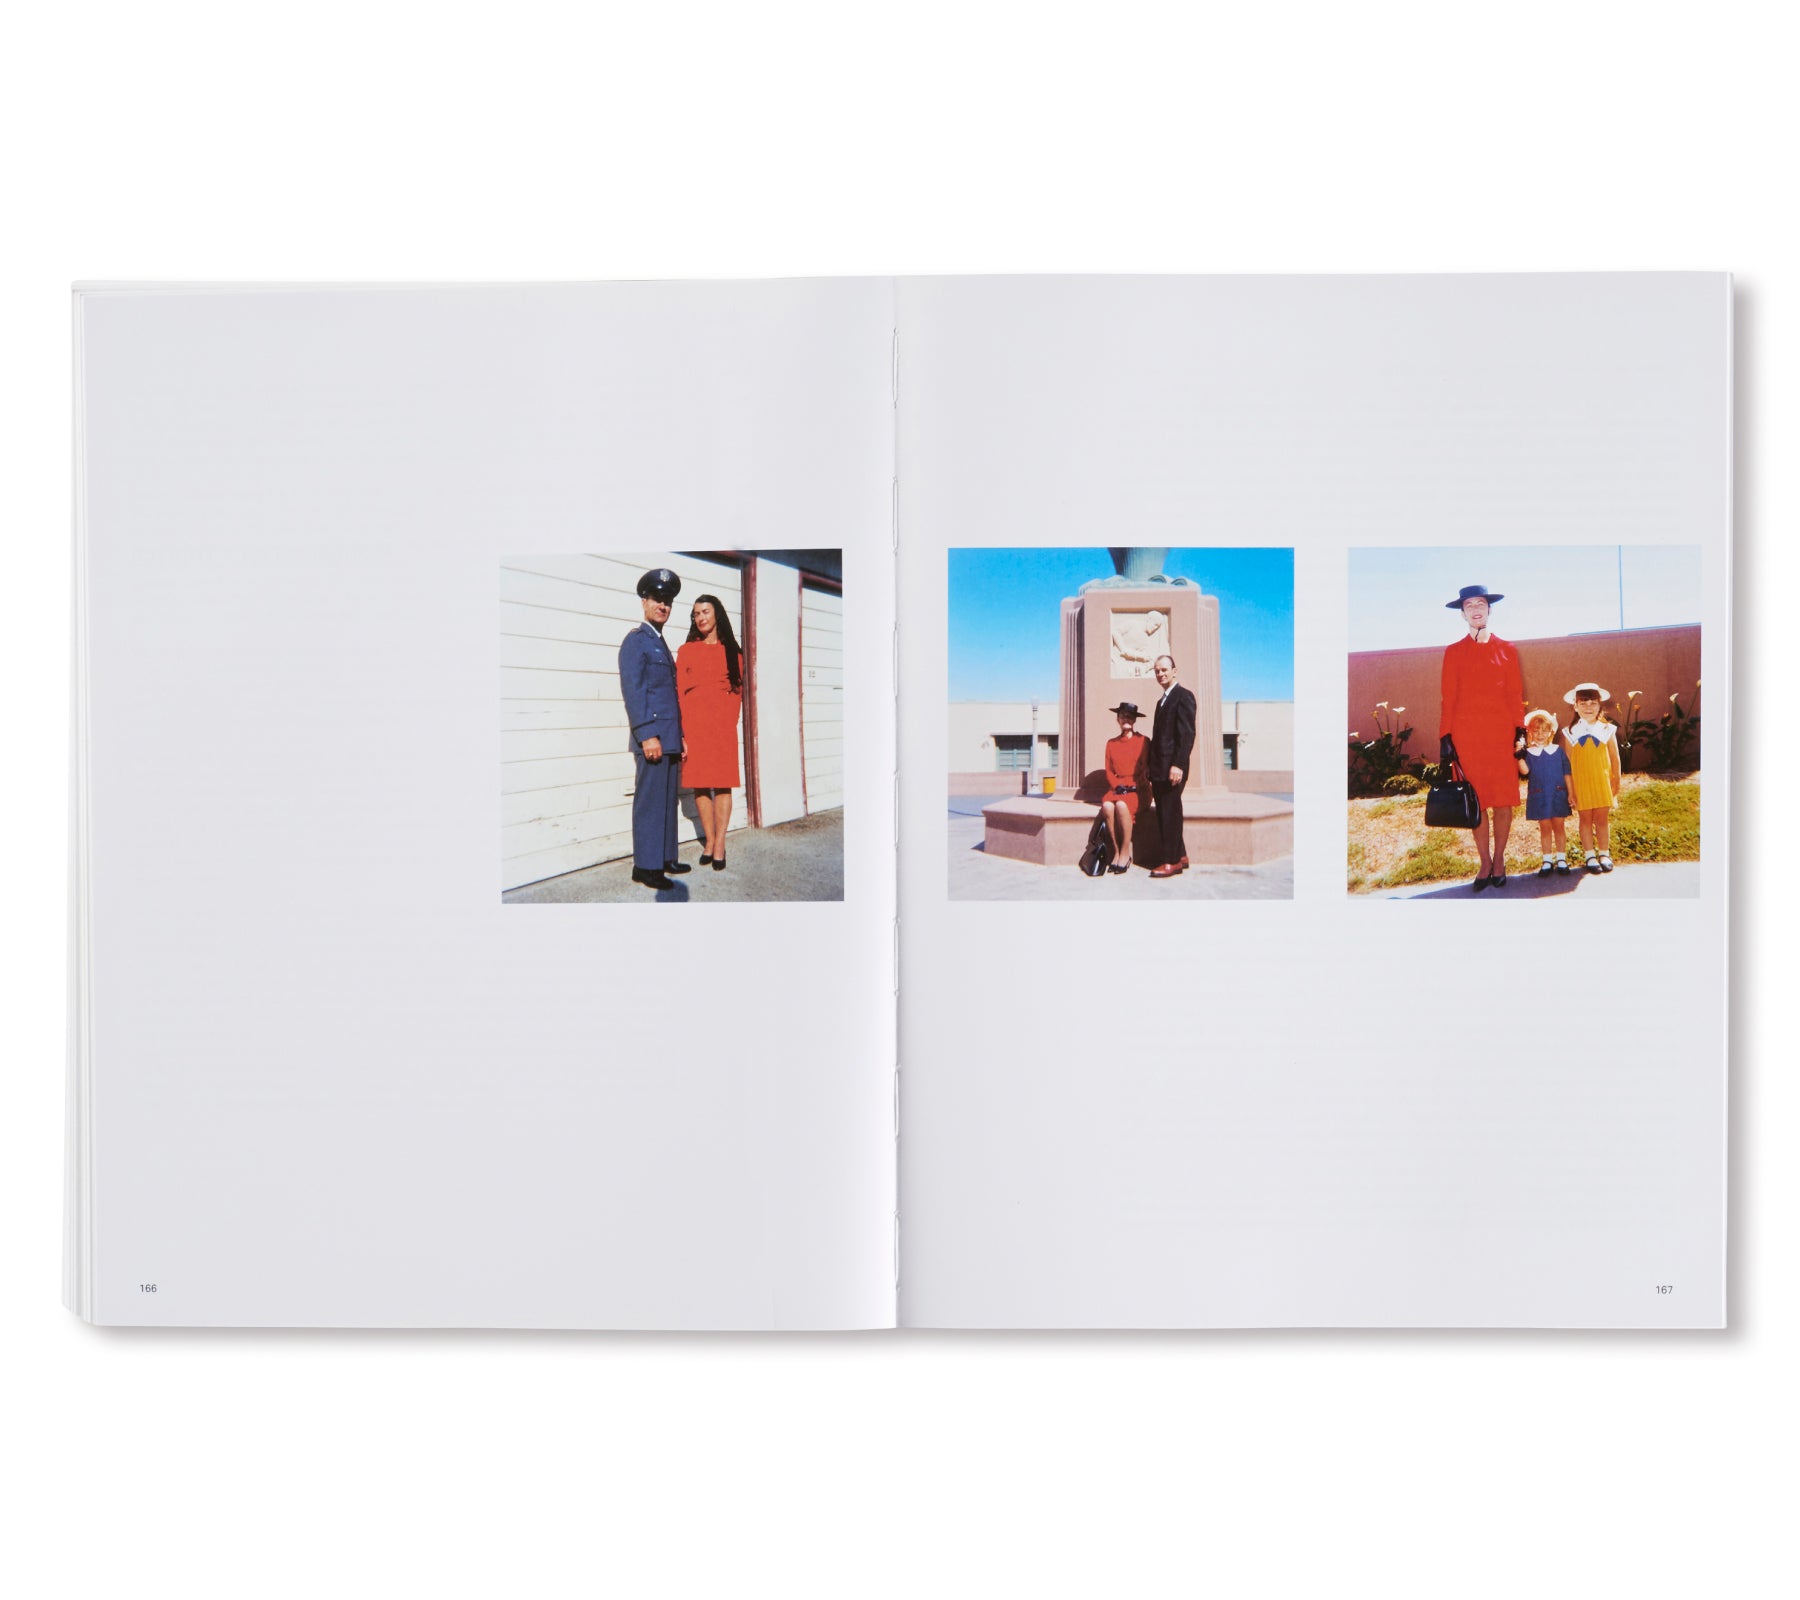 PHOTOGRAPHY AGAINST THE GRAIN: ESSAYS AND PHOTO WORKS, 1973–1983 by Allan Sekula